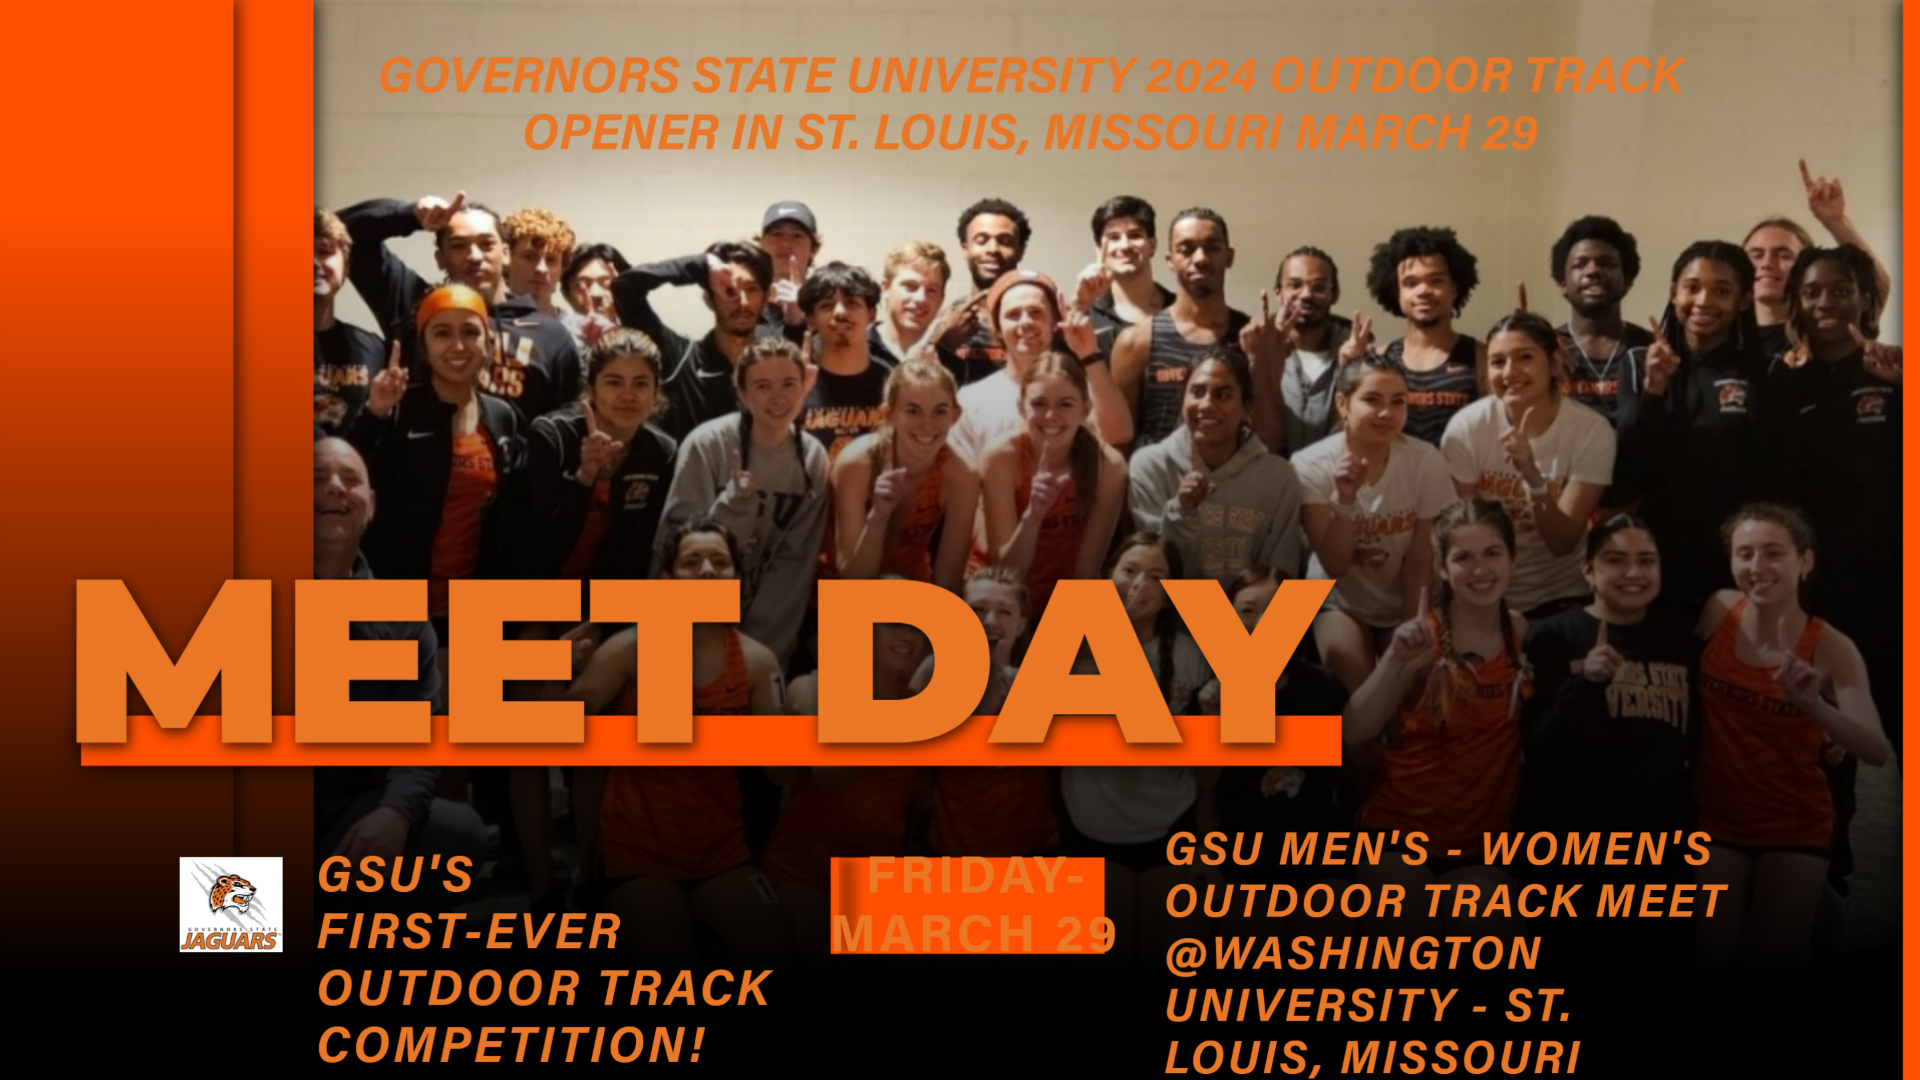 GSU's FIRST-EVER OUTDOOR TRACK MEET FRIDAY MARCH 29 IN ST. LOUIS